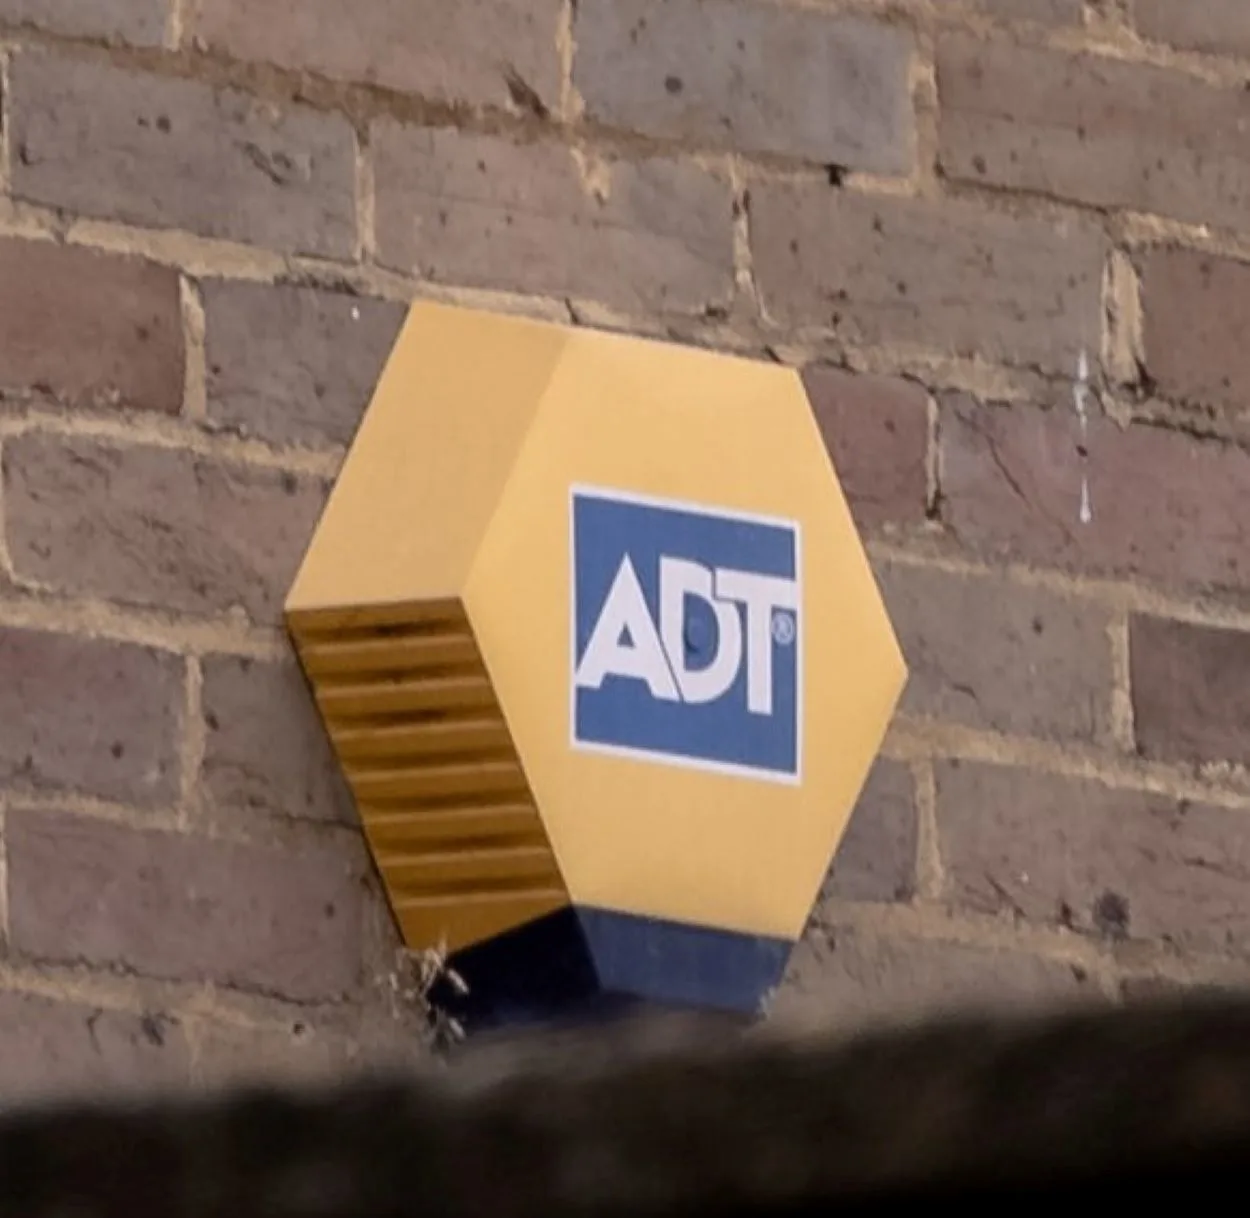 ADT logo outside a building